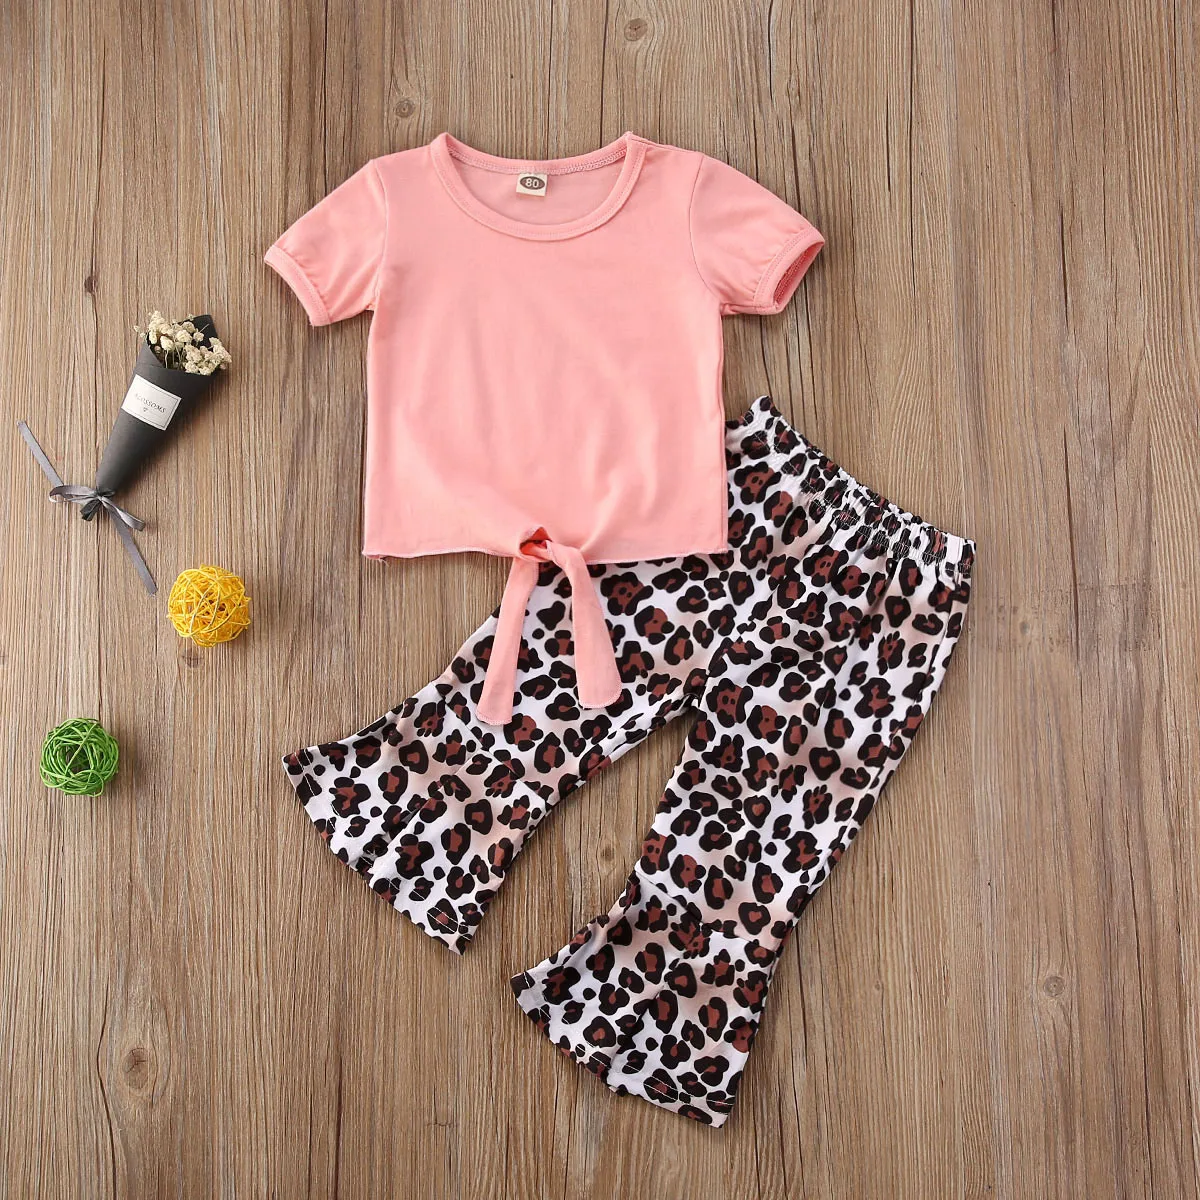 

Baby Girl Kids Short Sleeve Bowknot Tops+Lepoard Flare Pants Clothes Outfits 2PCS Cotton Set 1-6T